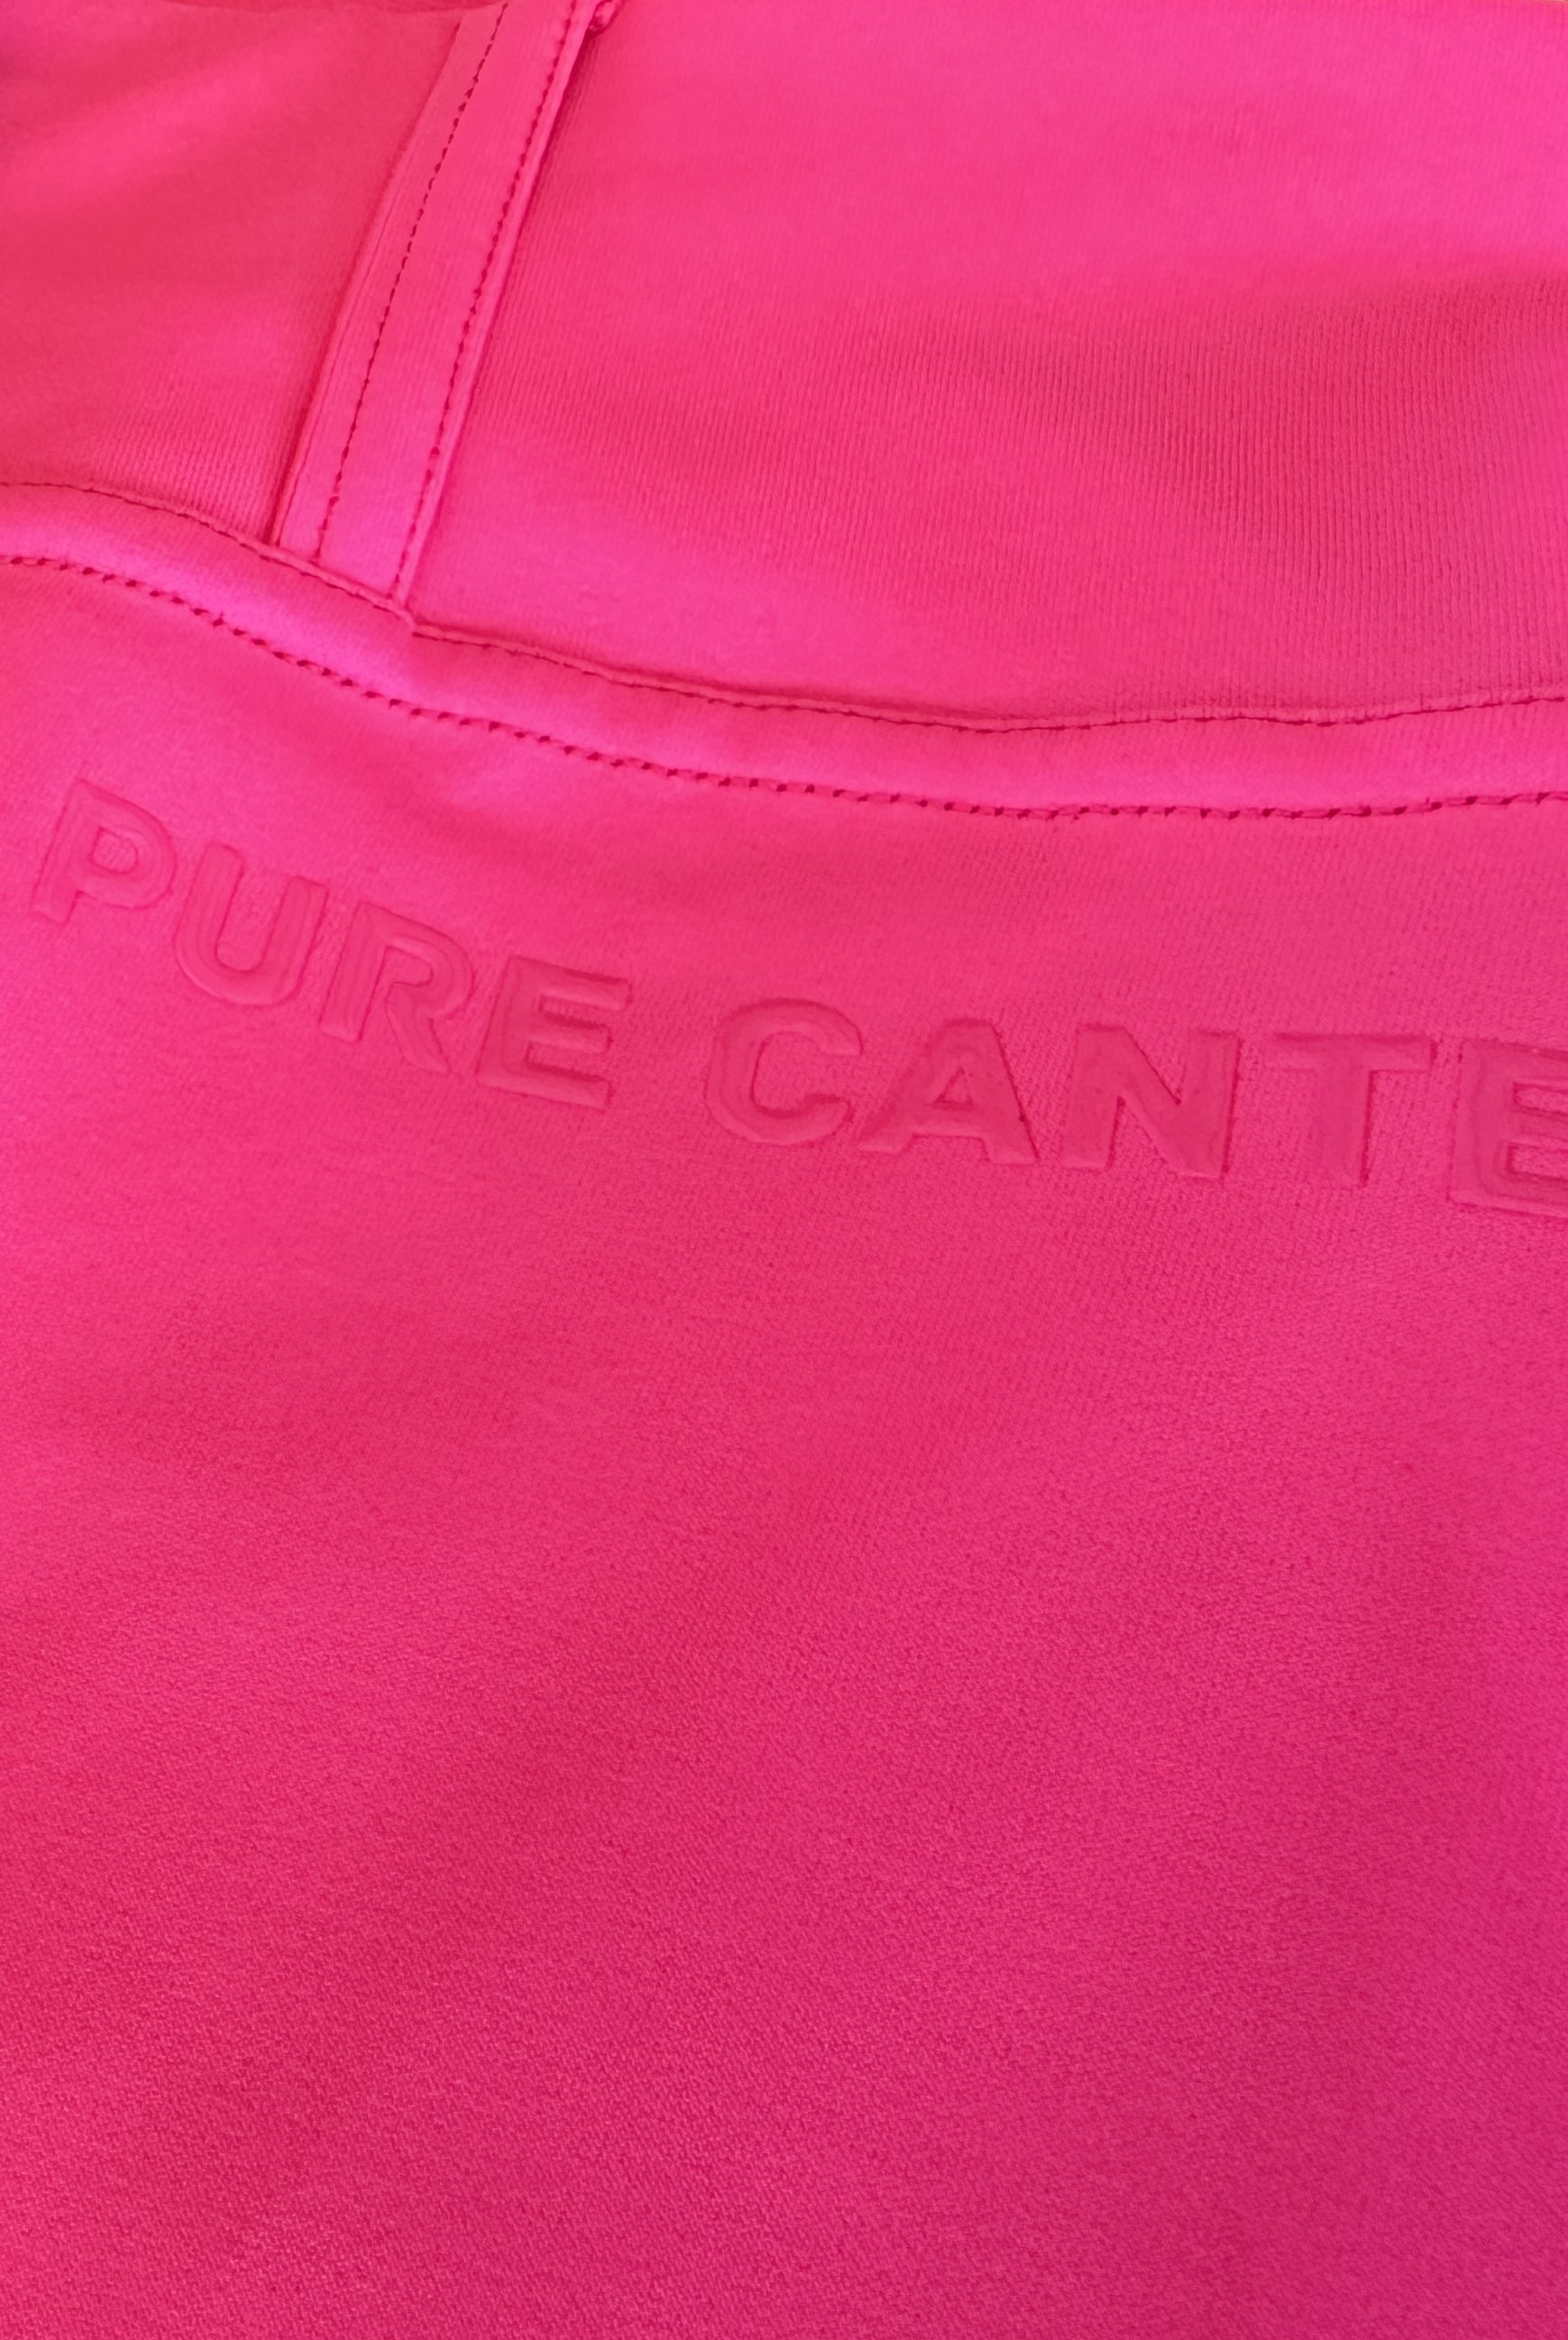 A close-up image of a bright pink garment with the embossed text "PURE CANTE" on the fabric. The stitching is visible along the seam, indicating a section of clothing, possibly a pocket or waistband area, typical in equestrian fashion. The product shown is Fusion Tights G2 - Hot Pink by Pure Canter.